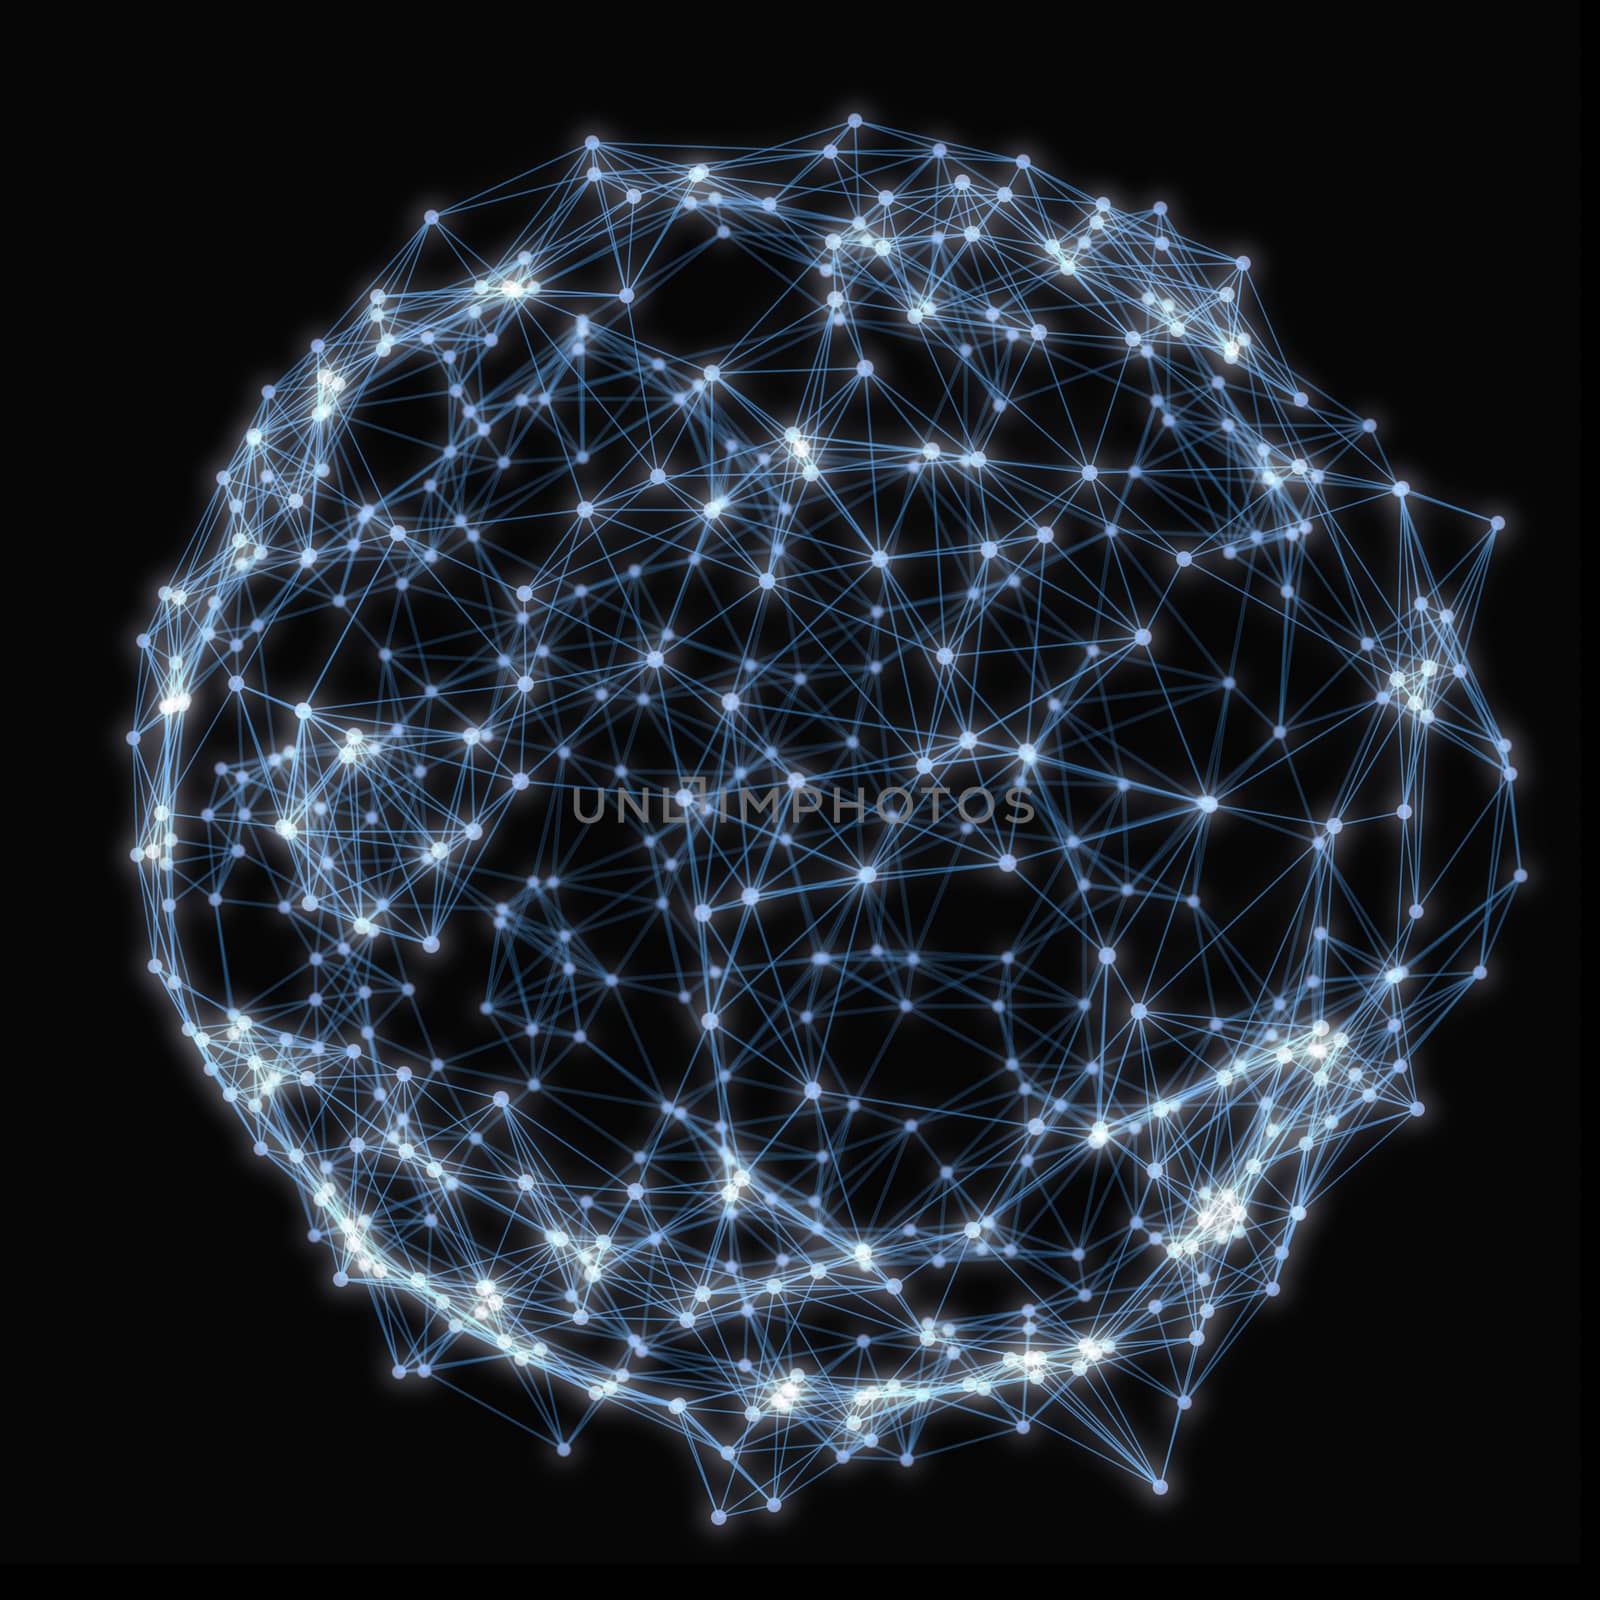 Illuminated sphere of glowing particles by cherezoff